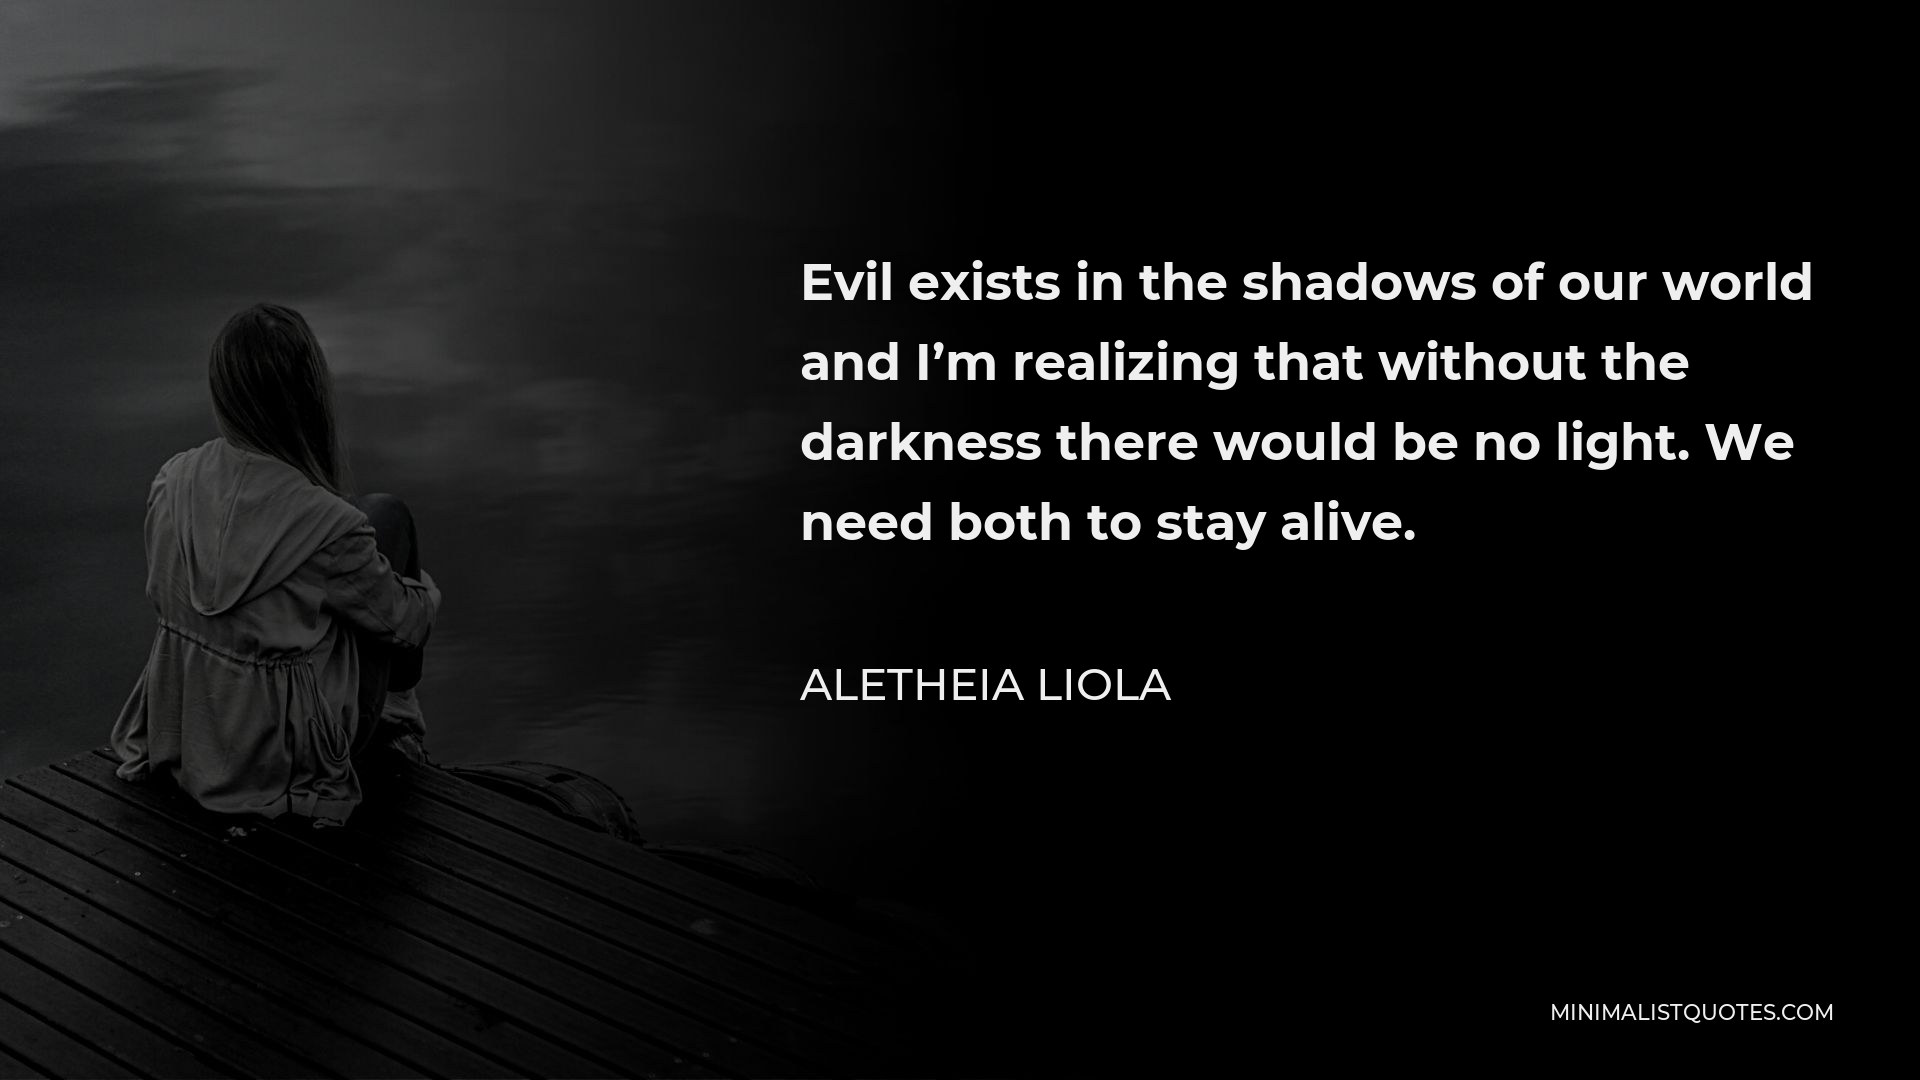 Aletheia Liola Quote - Evil exists in the shadows of our world and I’m realizing that without the darkness there would be no light. We need both to stay alive.